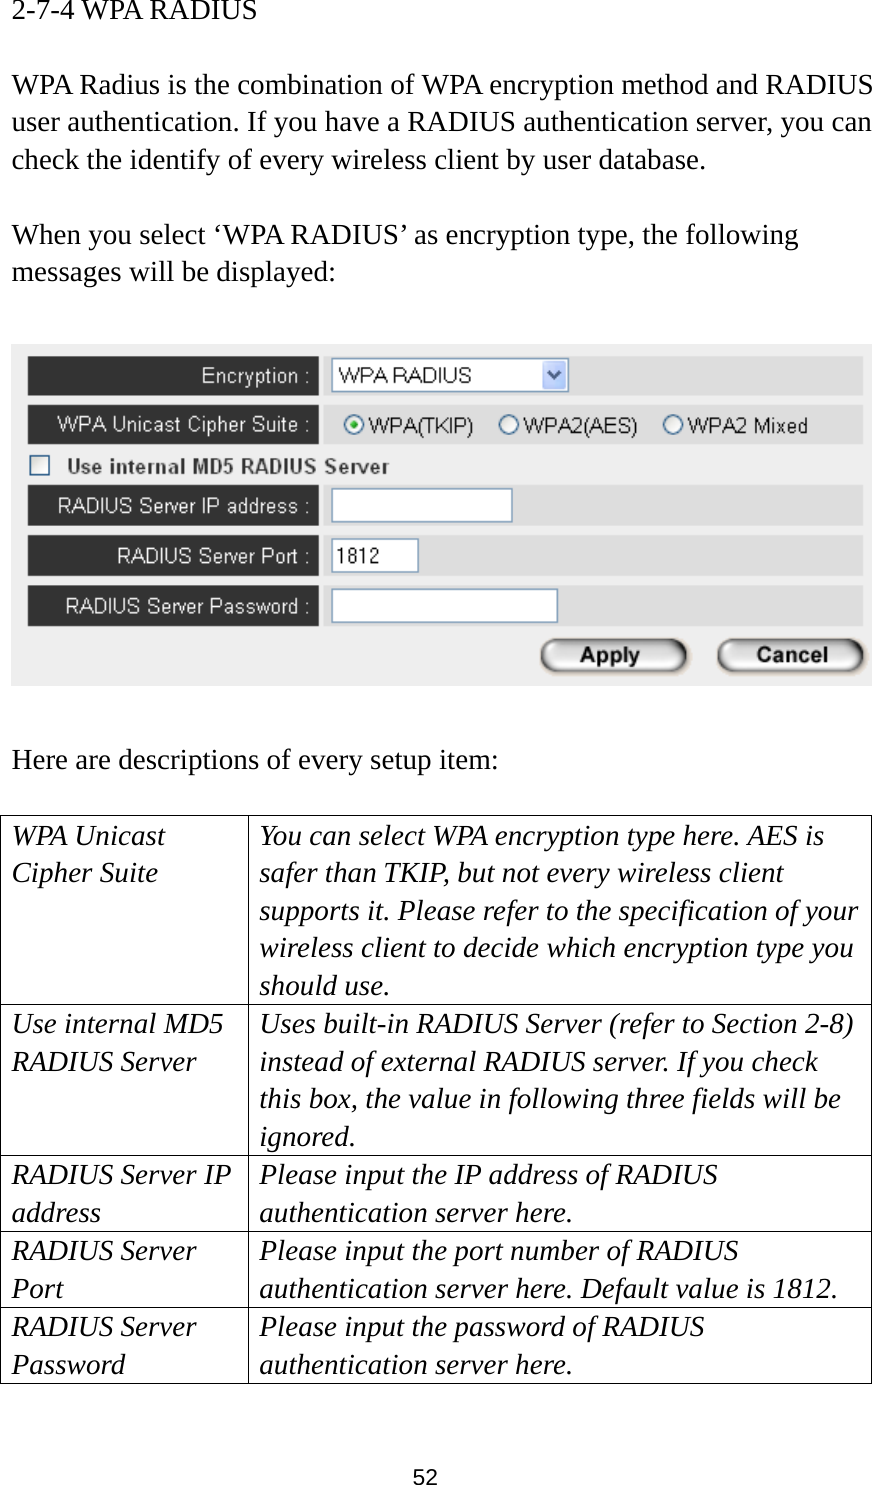  52 2-7-4 WPA RADIUS  WPA Radius is the combination of WPA encryption method and RADIUS user authentication. If you have a RADIUS authentication server, you can check the identify of every wireless client by user database.  When you select ‘WPA RADIUS’ as encryption type, the following messages will be displayed:    Here are descriptions of every setup item:  WPA Unicast Cipher Suite You can select WPA encryption type here. AES is safer than TKIP, but not every wireless client supports it. Please refer to the specification of your wireless client to decide which encryption type you should use. Use internal MD5 RADIUS Server Uses built-in RADIUS Server (refer to Section 2-8) instead of external RADIUS server. If you check this box, the value in following three fields will be ignored. RADIUS Server IP address Please input the IP address of RADIUS authentication server here. RADIUS Server Port Please input the port number of RADIUS authentication server here. Default value is 1812. RADIUS Server Password Please input the password of RADIUS authentication server here.  